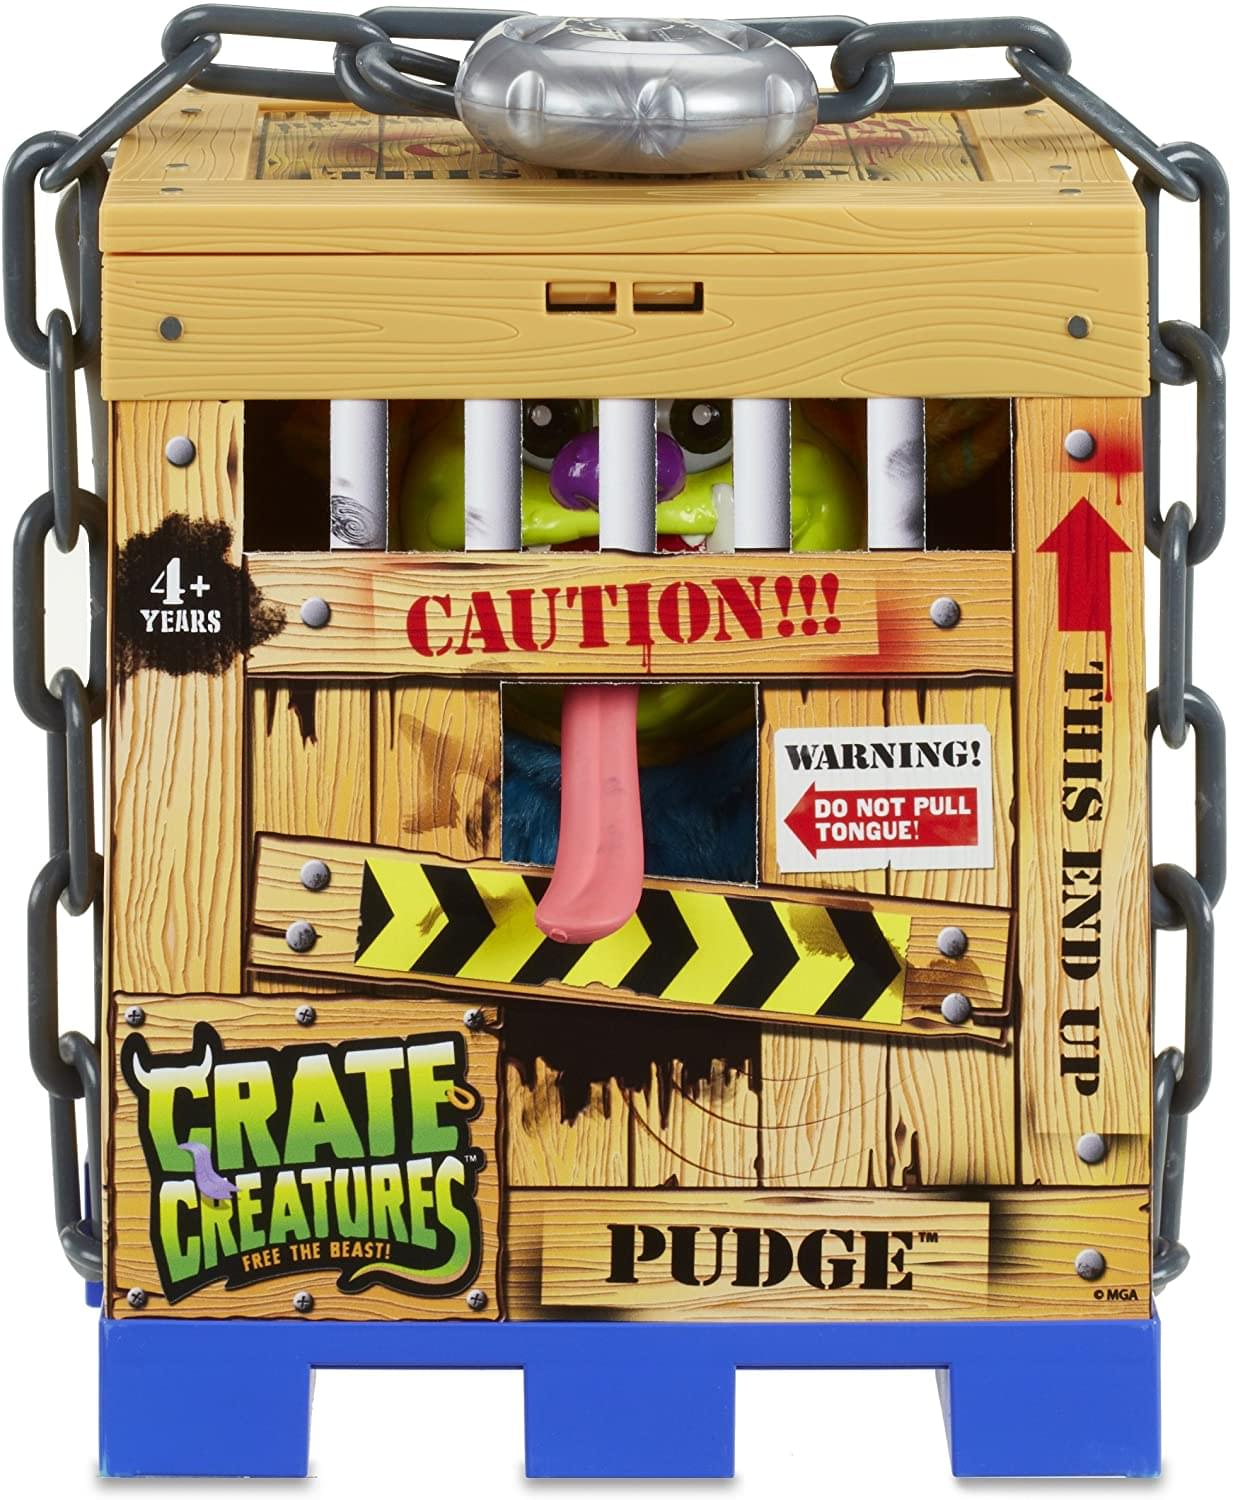 Crate Creatures Electronic 7 Inch Action Figure | Pudge